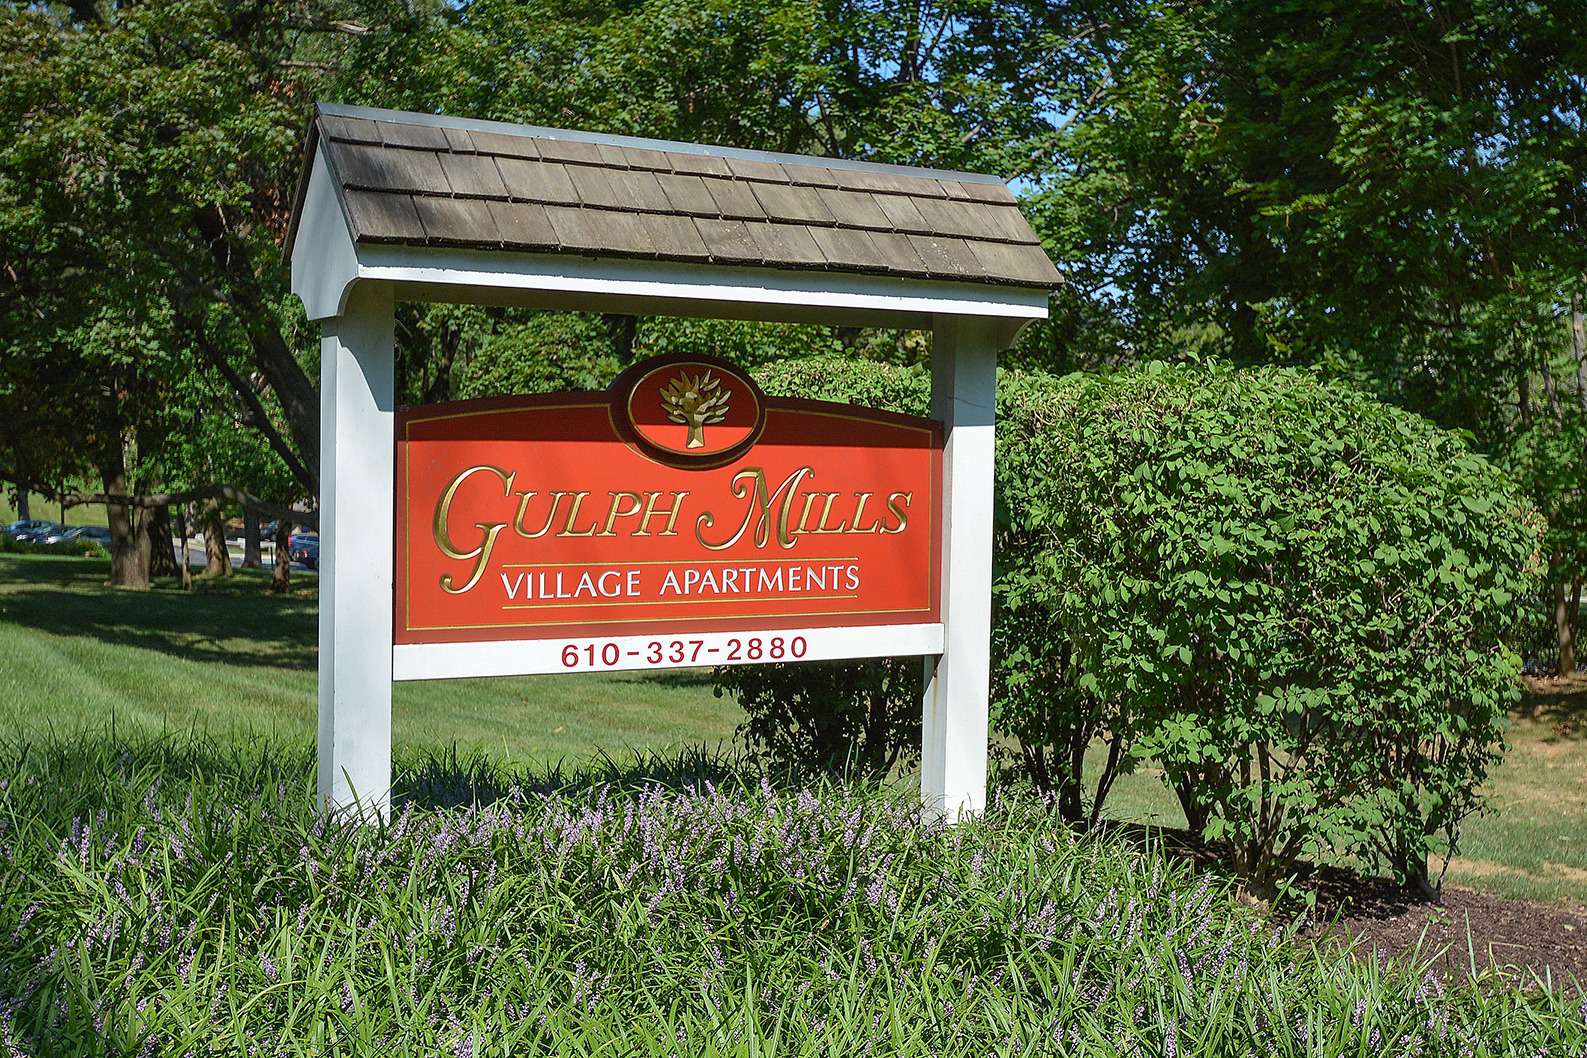 Gulph Mills Village Apartments sign on grass with trees surrounding it.